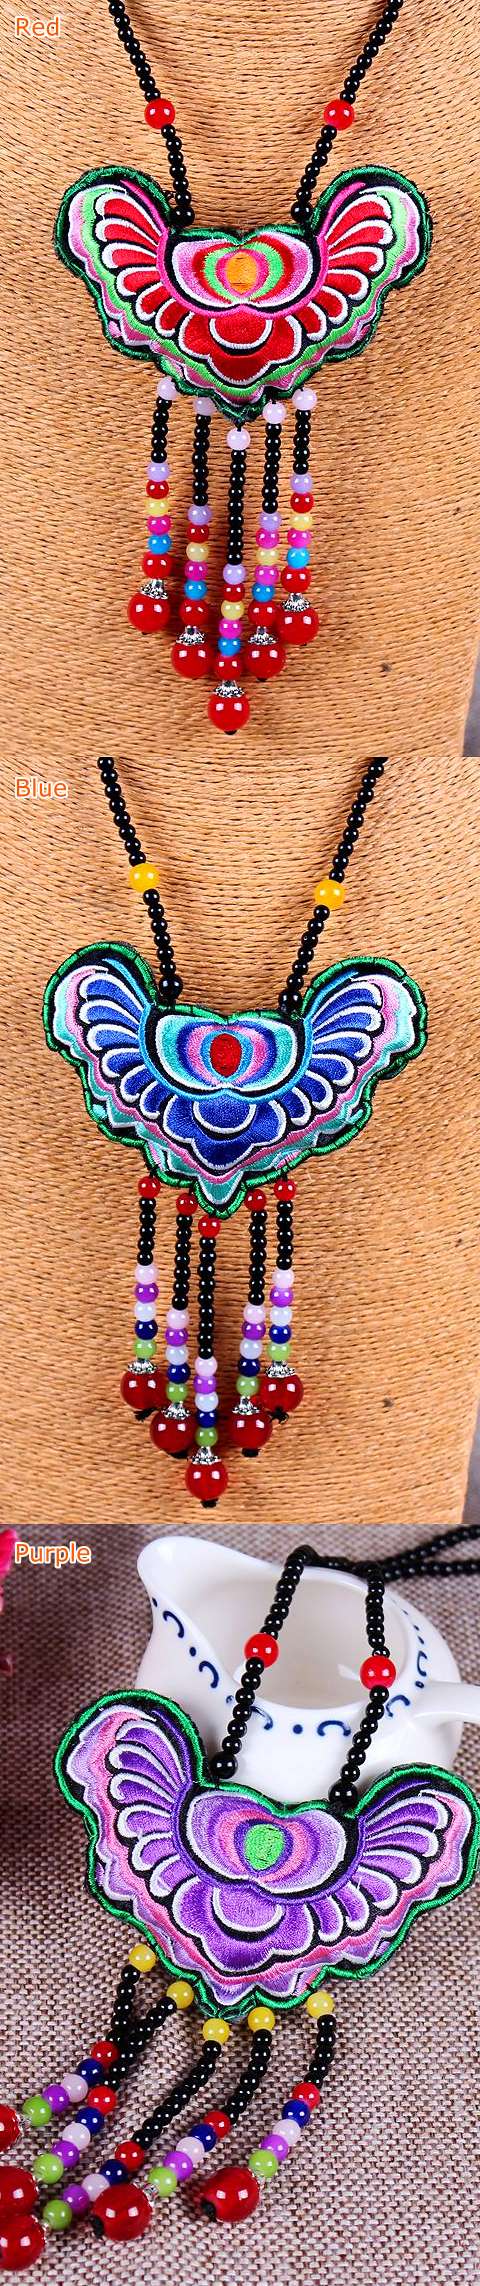 Handmade Ethnic Embroidery Necklace